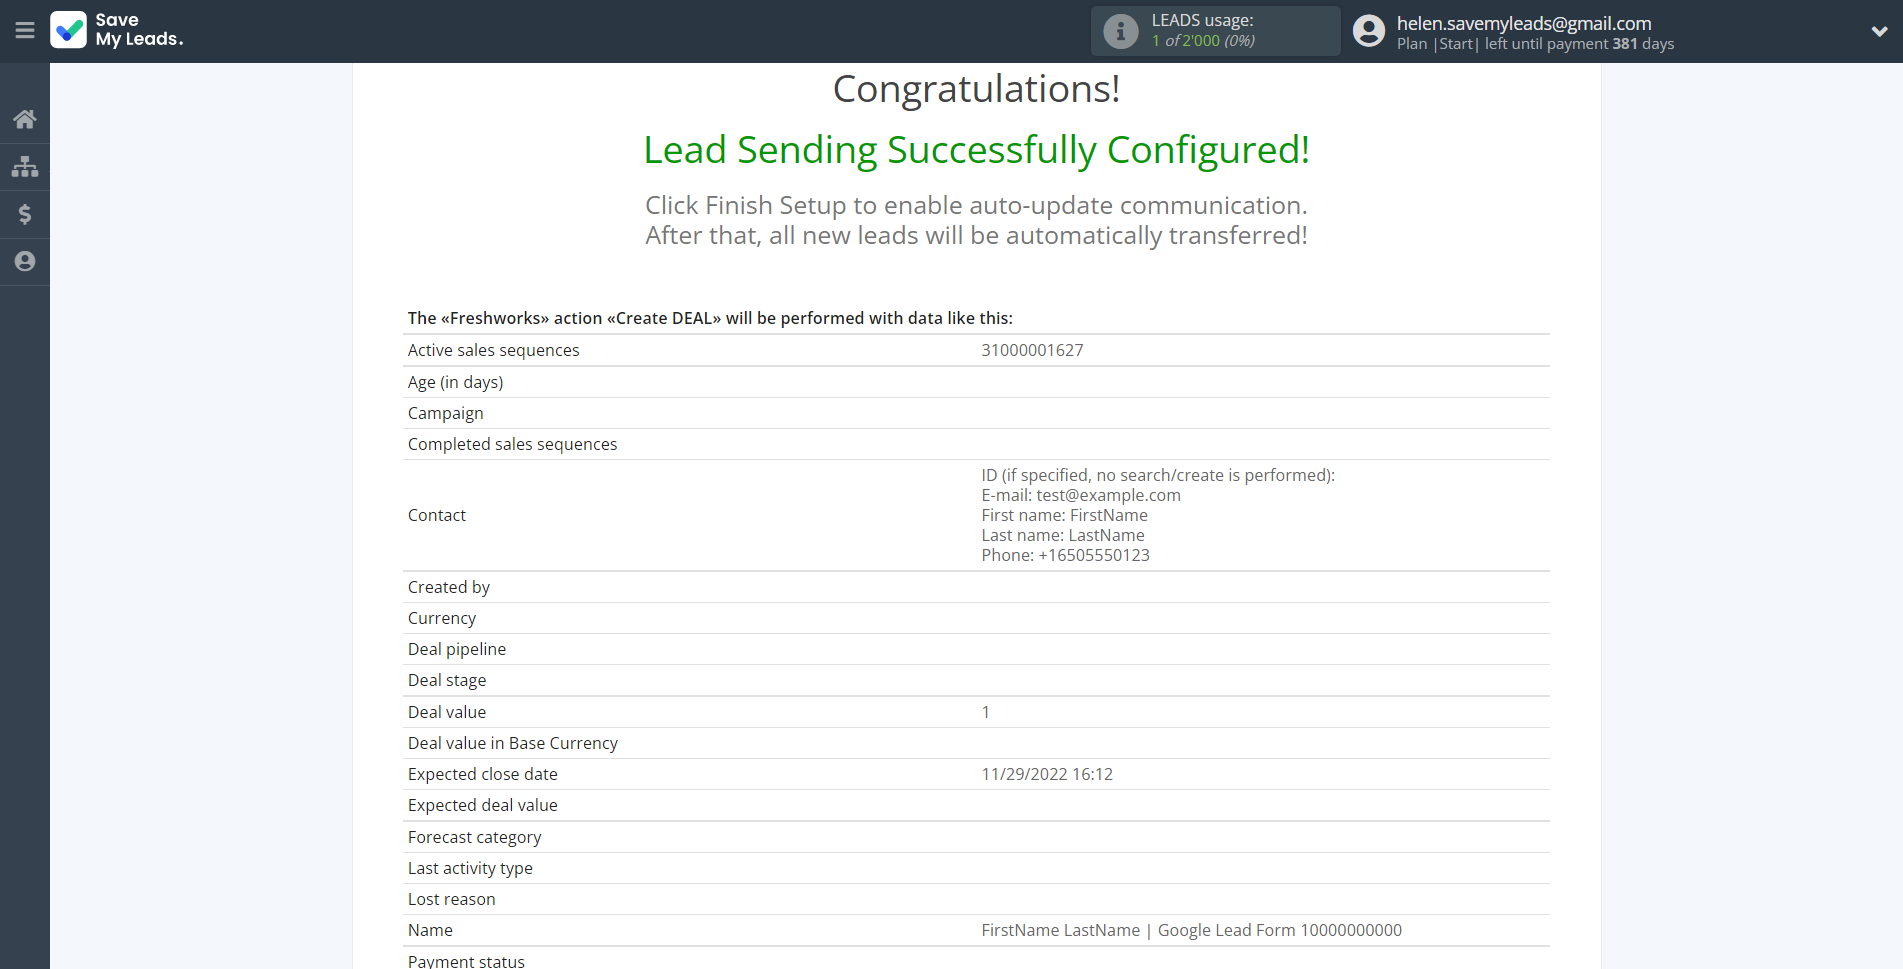 How to Connect Google Lead Form with Freshworks Create Deal | Test data